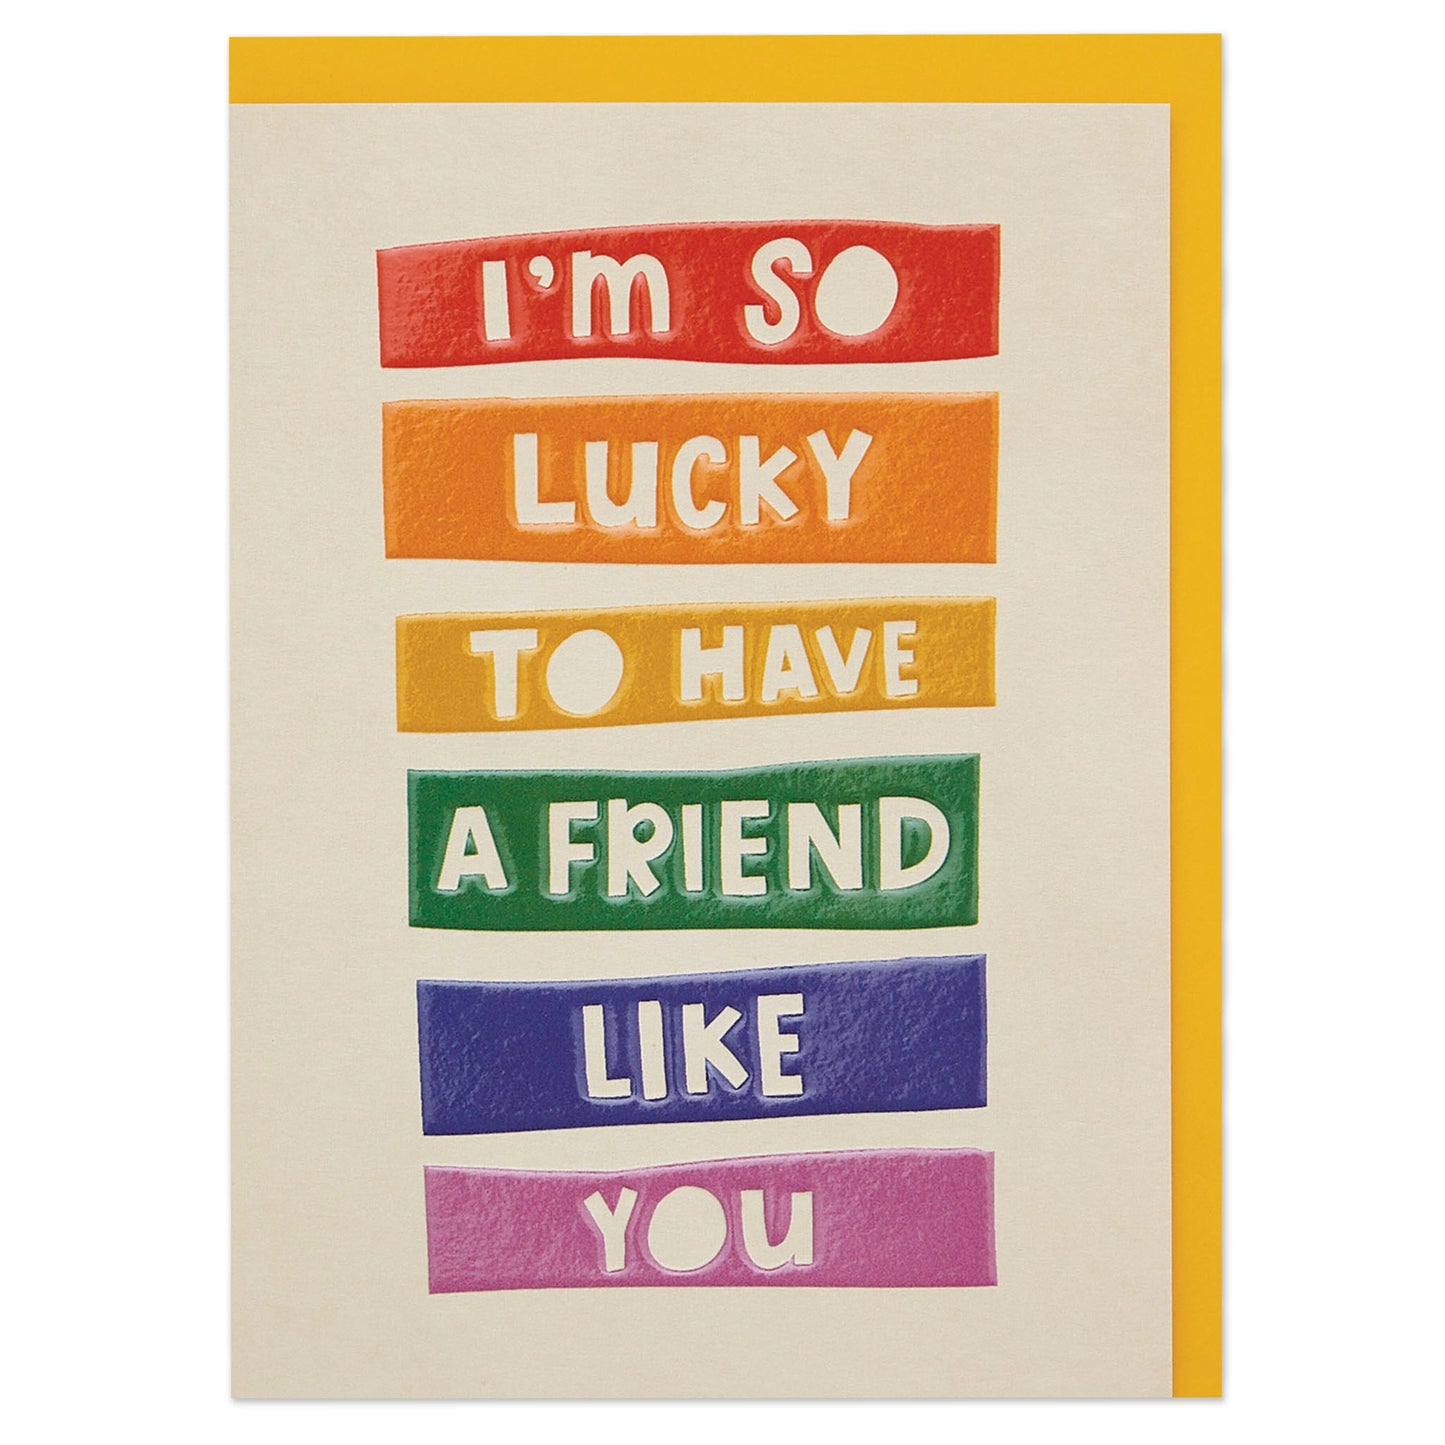 I'm so lucky to have a friend like you Card